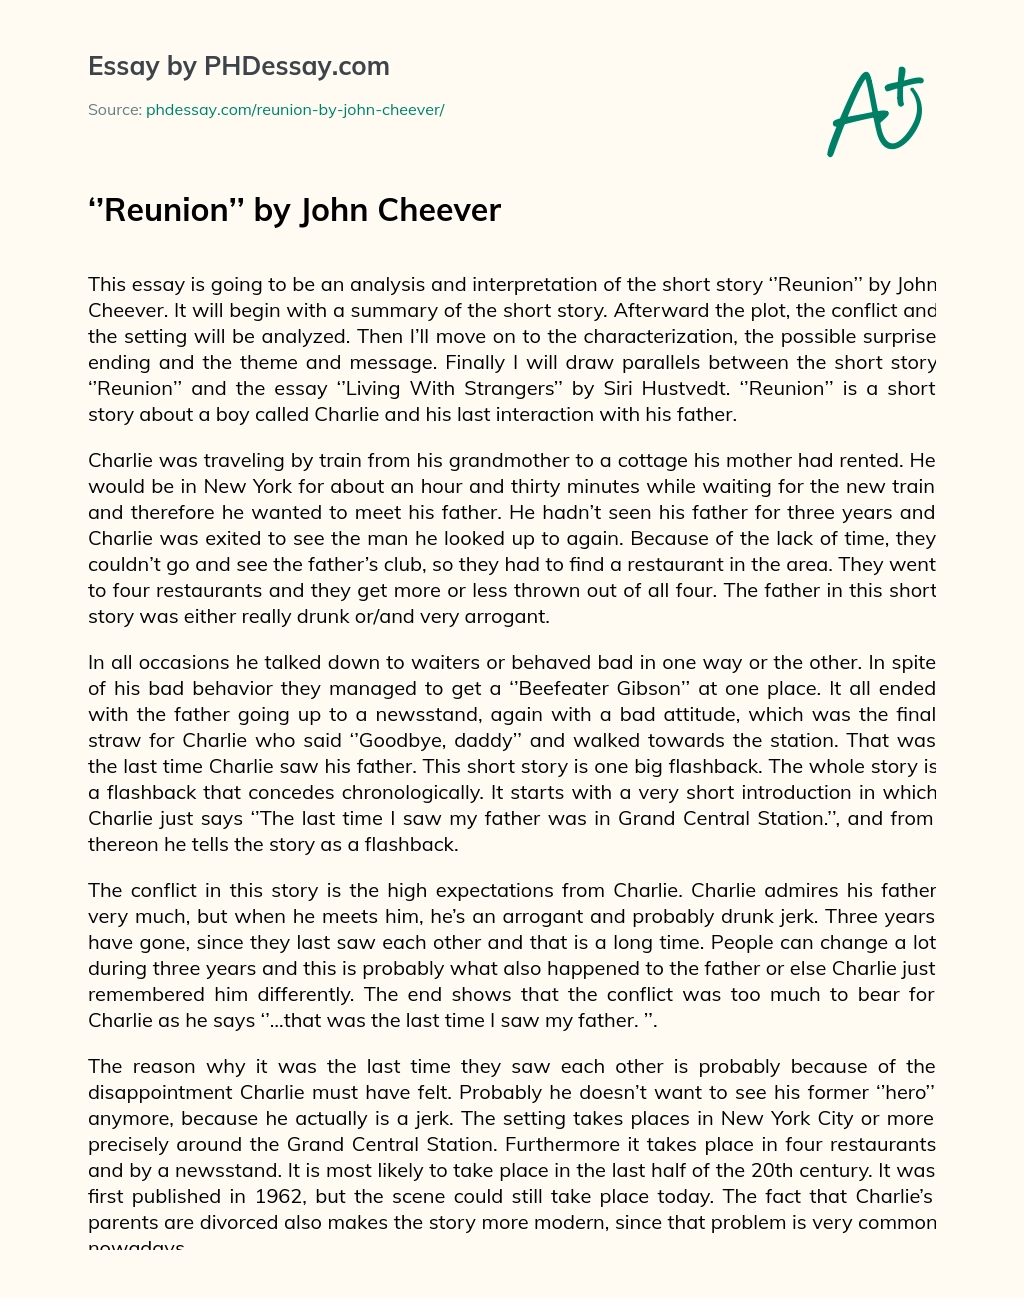 Reunion by John Cheever essay